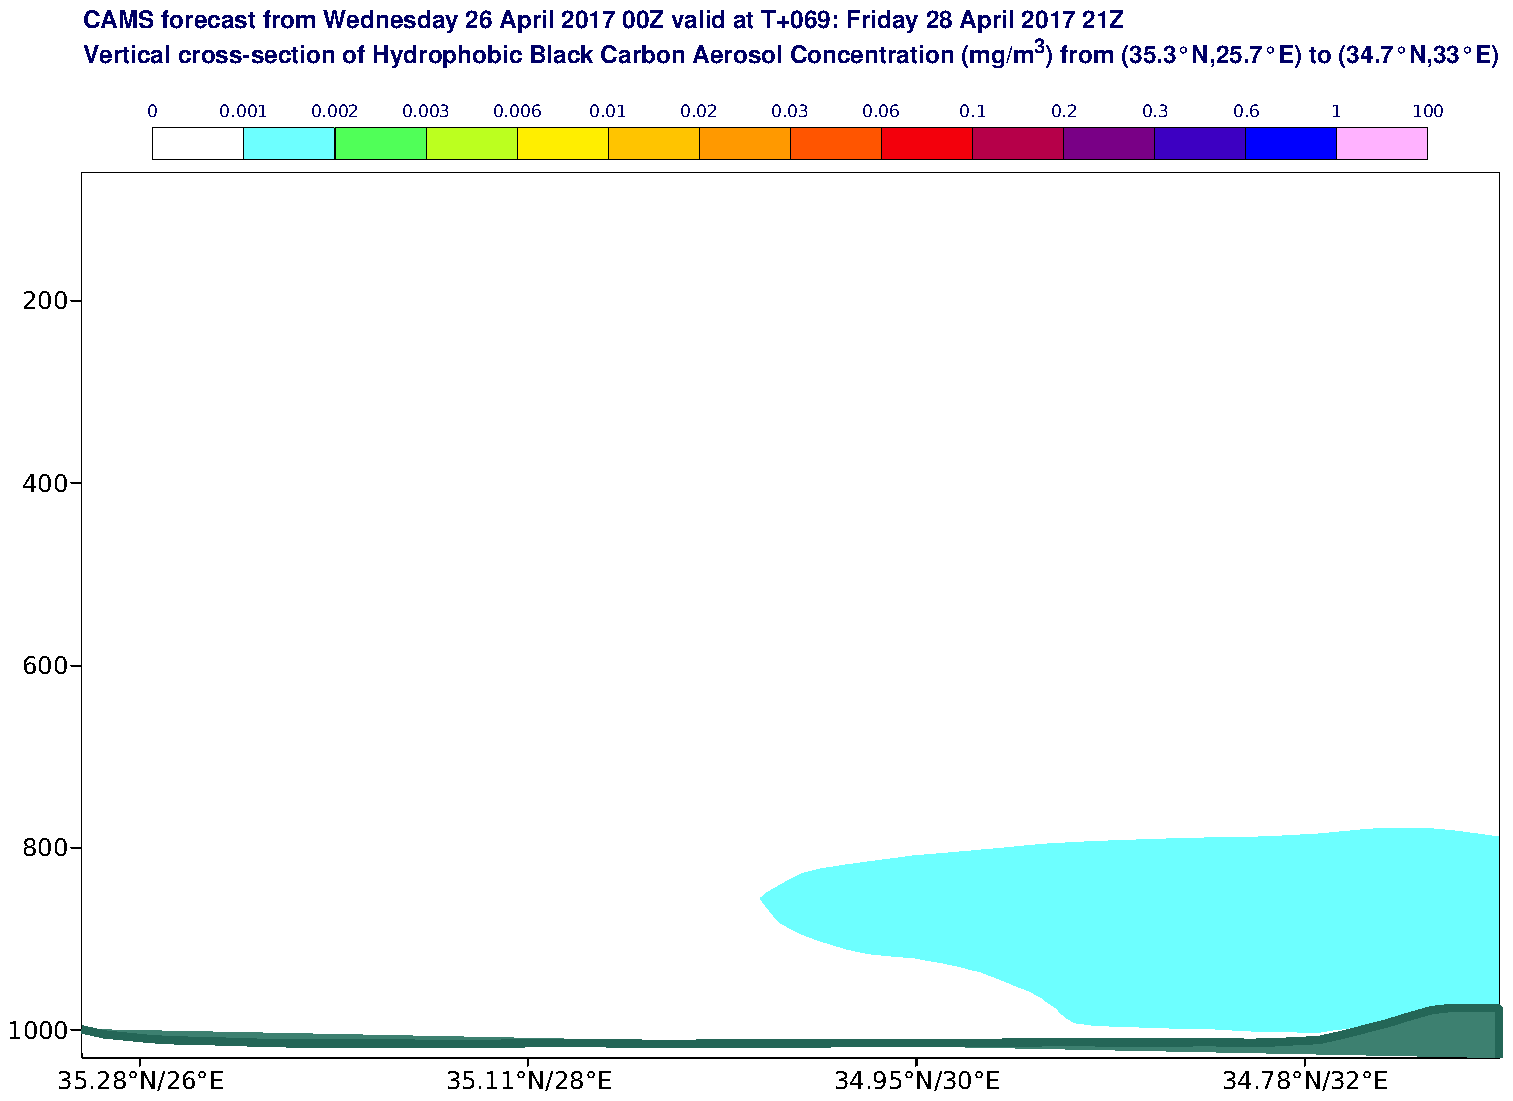 Vertical cross-section of Hydrophobic Black Carbon Aerosol Concentration (mg/m3) valid at T69 - 2017-04-28 21:00